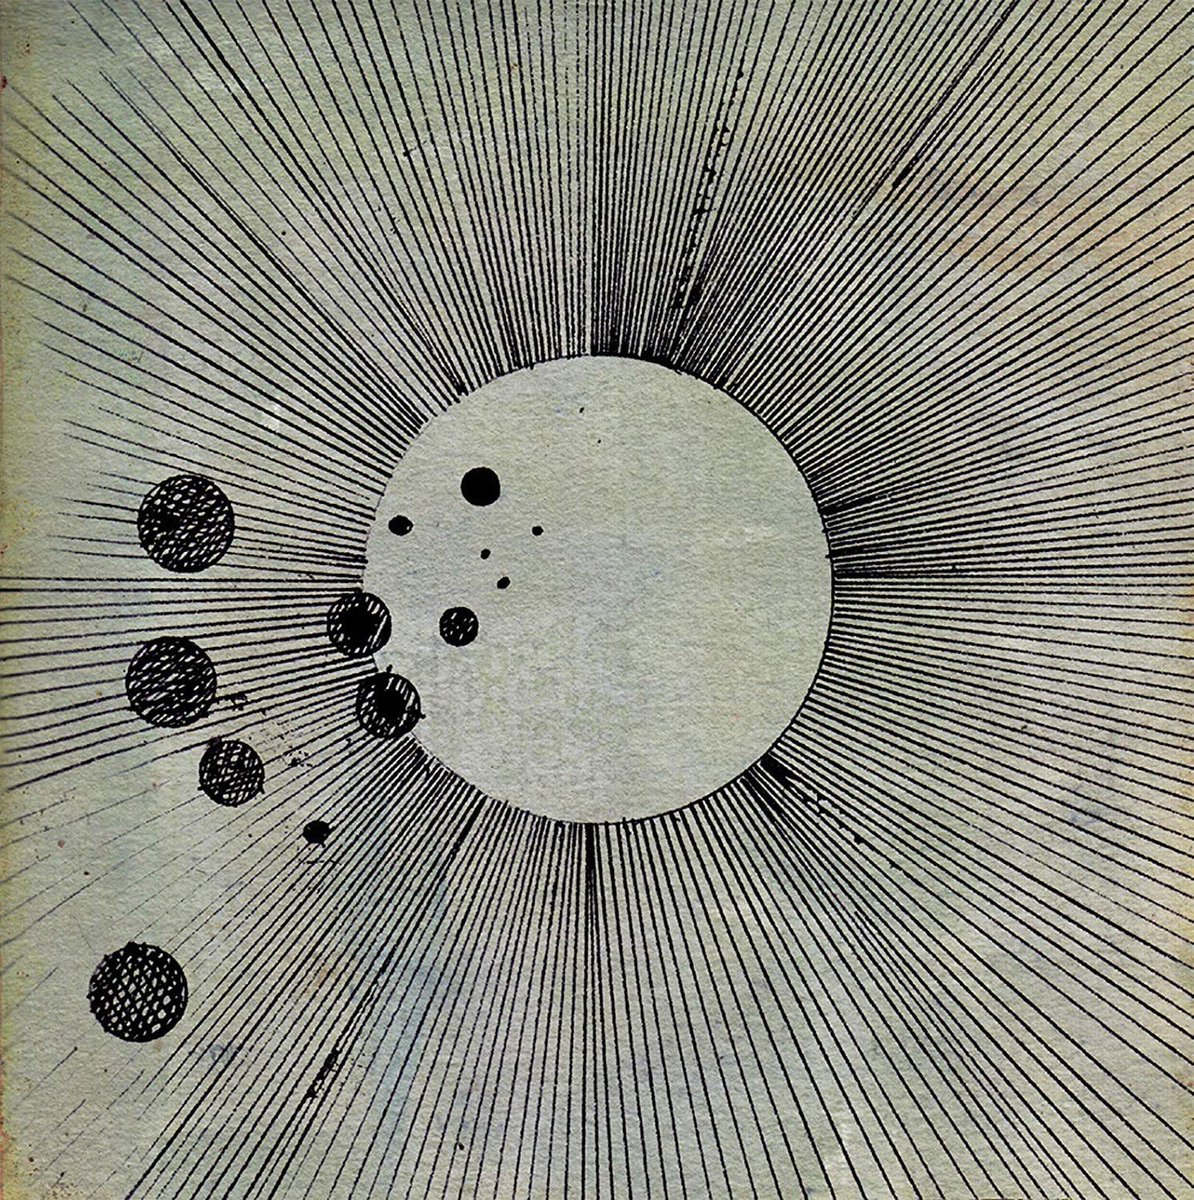 7. Flying Lotus - CosmogrammaAn experimental jazz-infused electronic adventure through the crazy mind of Flying Lotus. It ranges from peaceful and beautiful to an chaotic collection of noises and instruments arranged in a very precise manner.